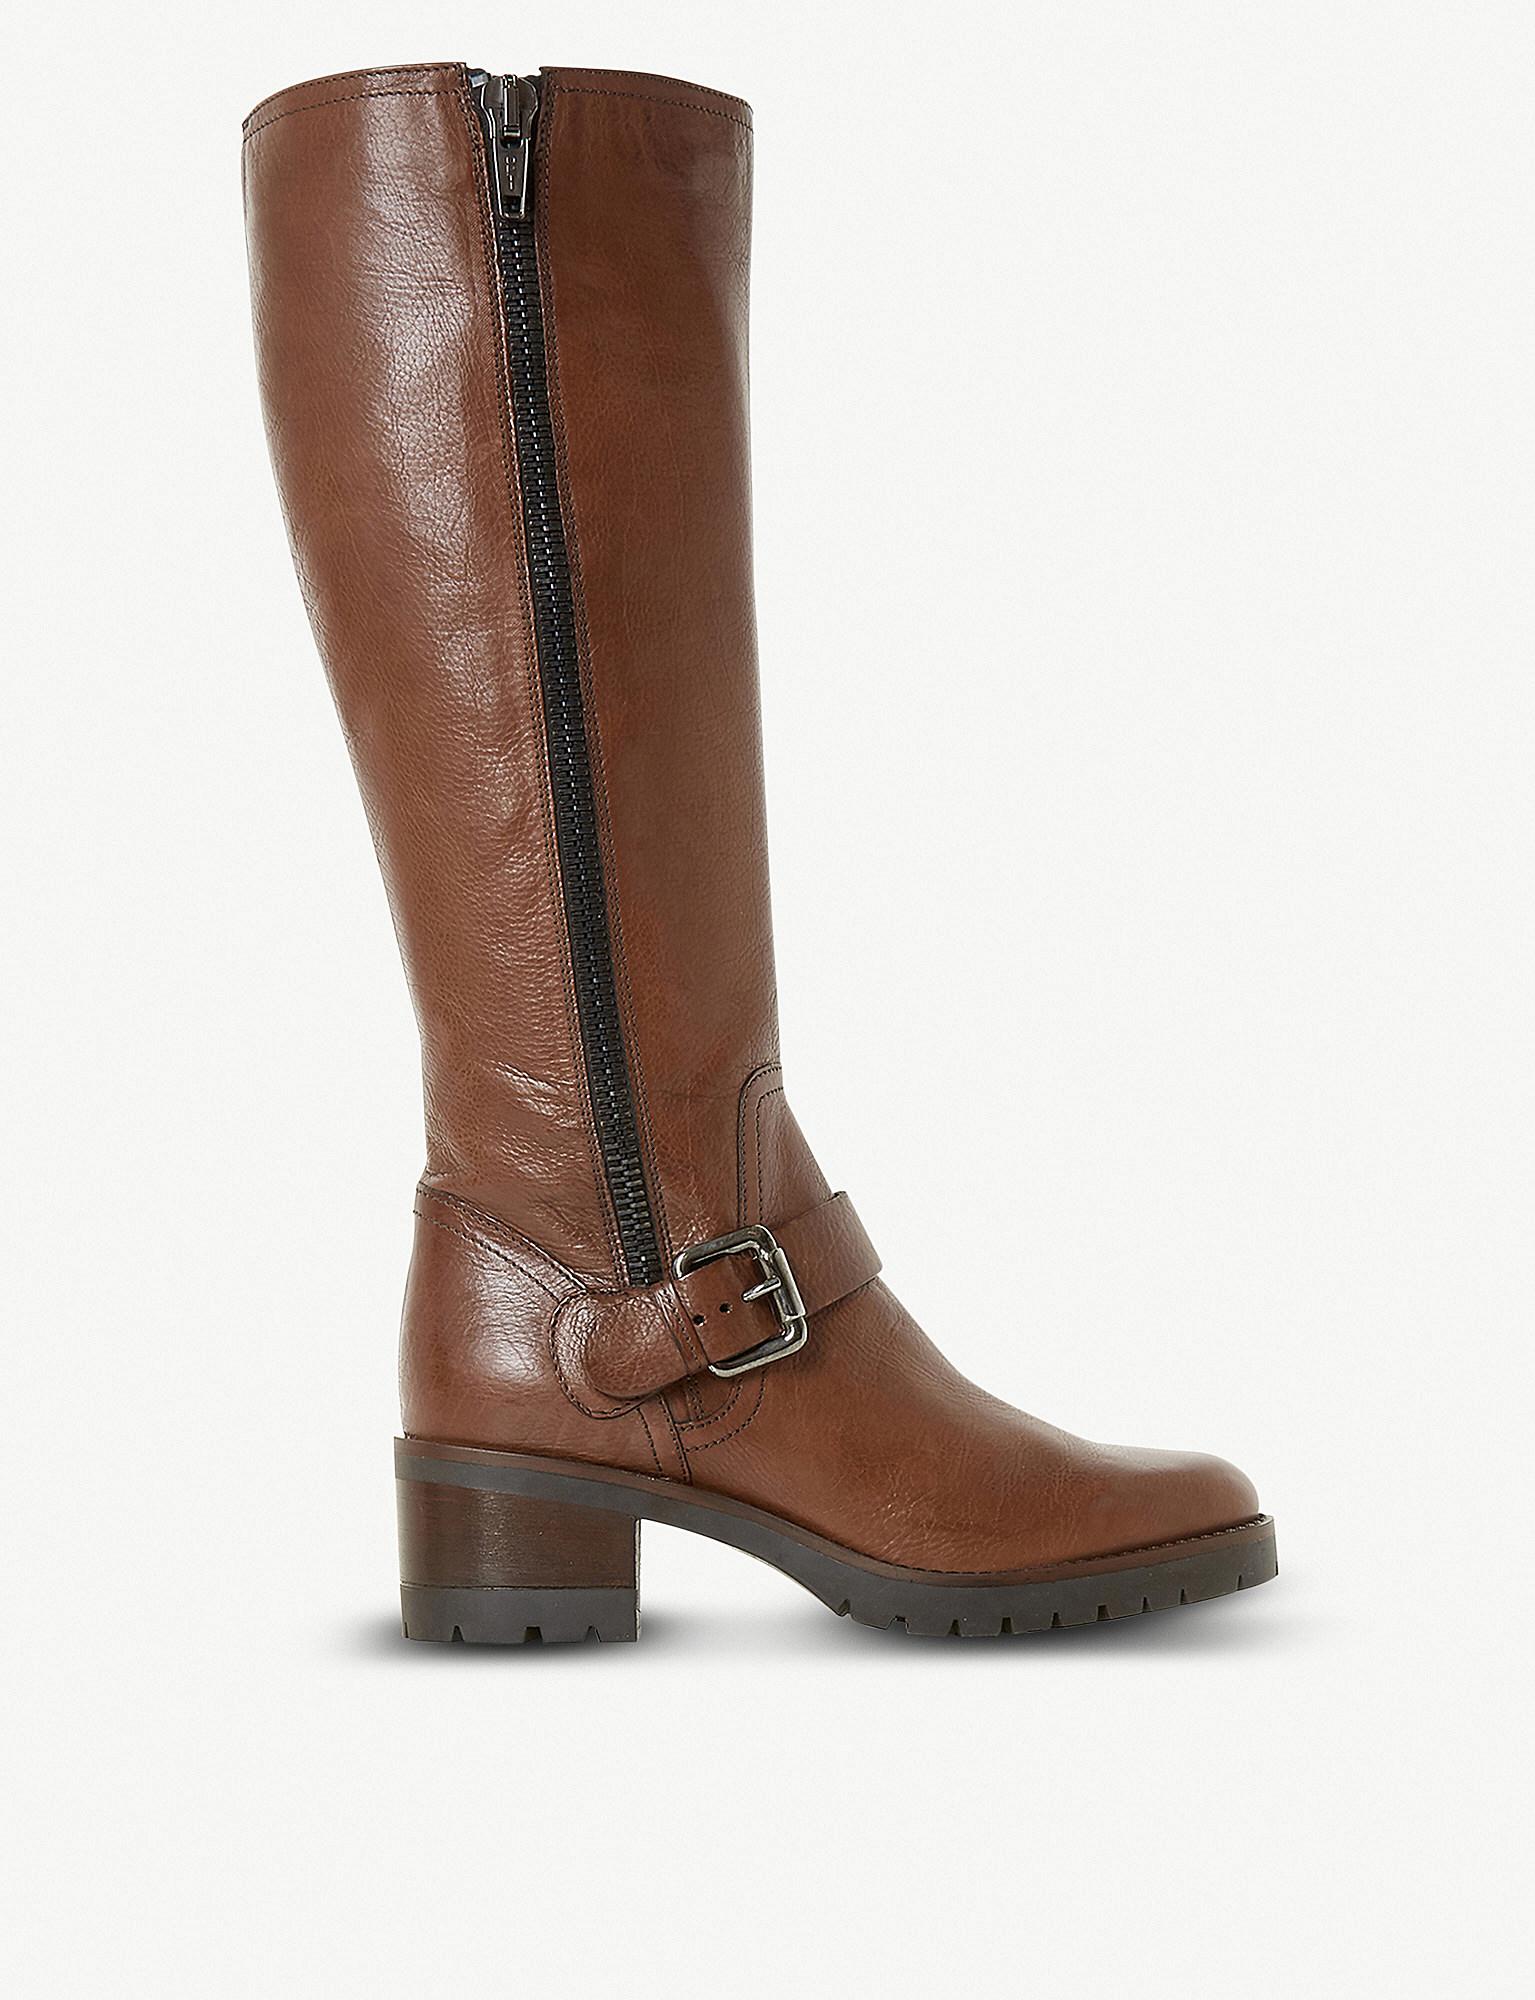 Dune Tilbury Leather Riding Boots In Brown Leather Brown Lyst 